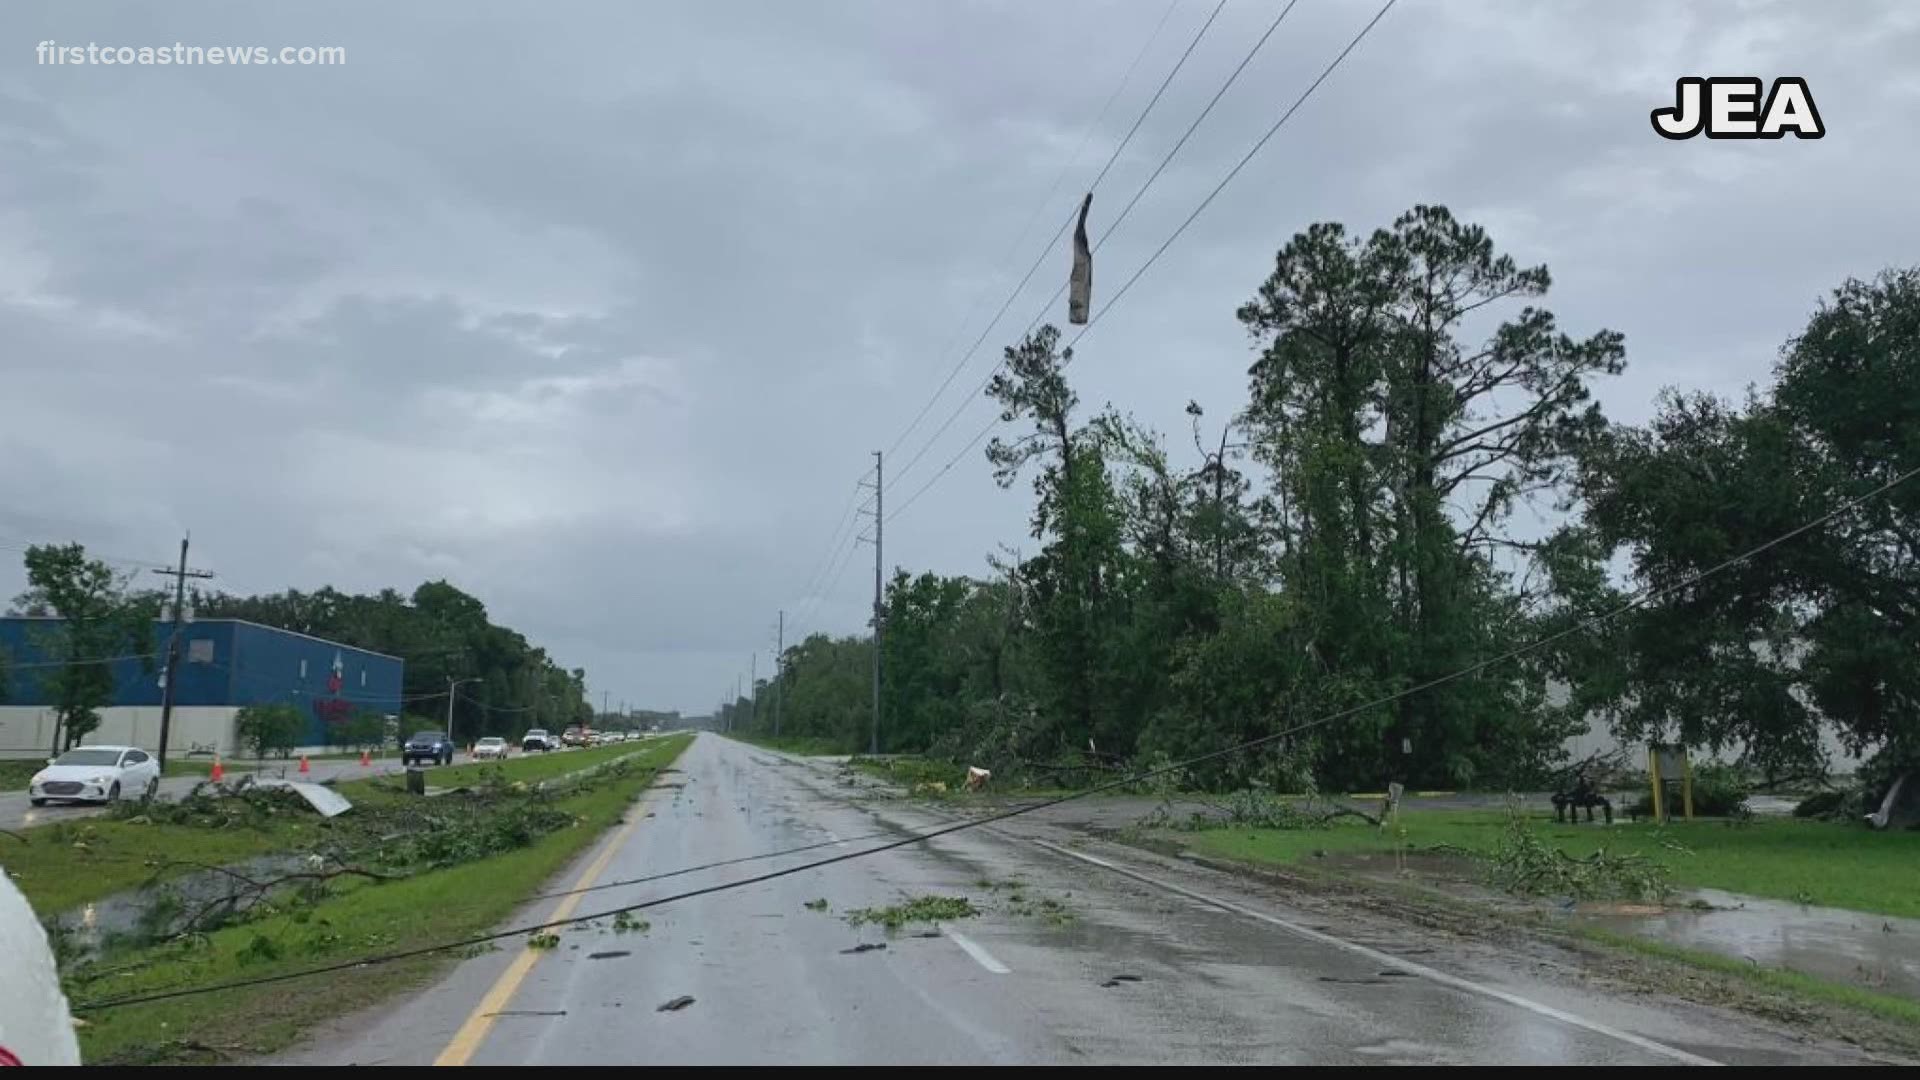 First Coast News has team coverage tracking all three tornadoes that hit our area, including one that damaged the Southside in the area of Philips Highway.